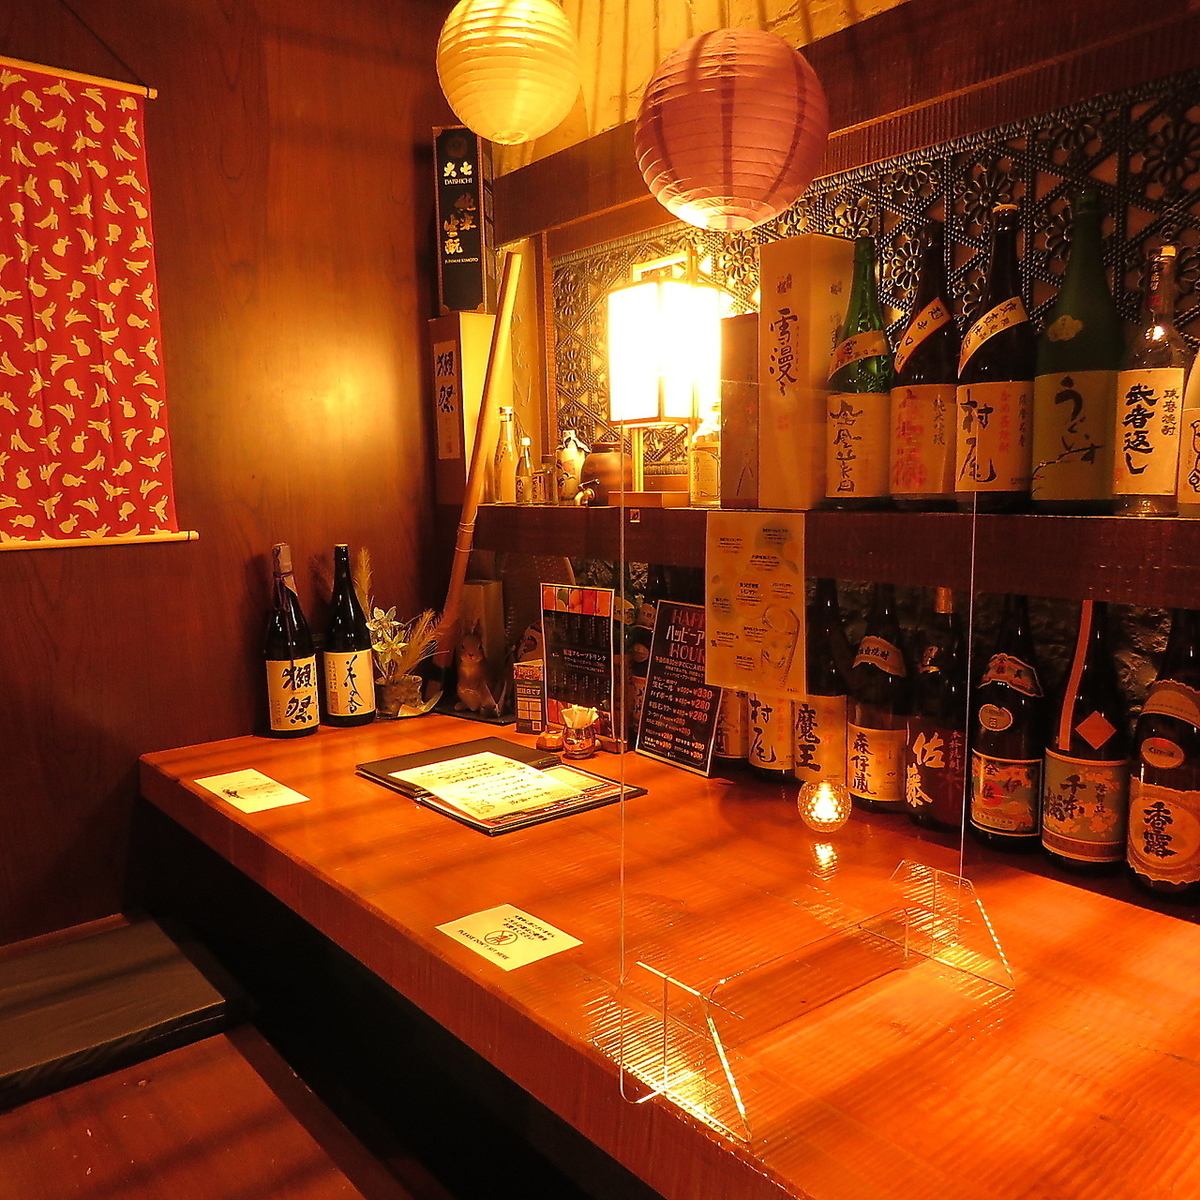 This is an izakaya with private rooms. Enjoy local cuisine and fresh ingredients...